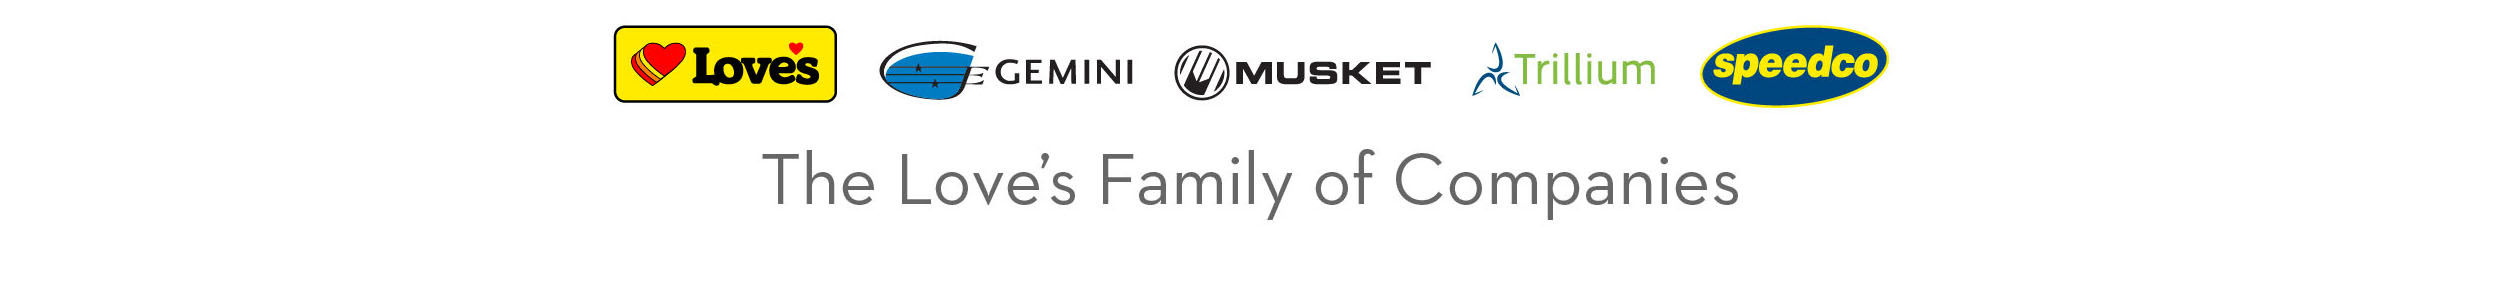 About the Love's Family of Companies